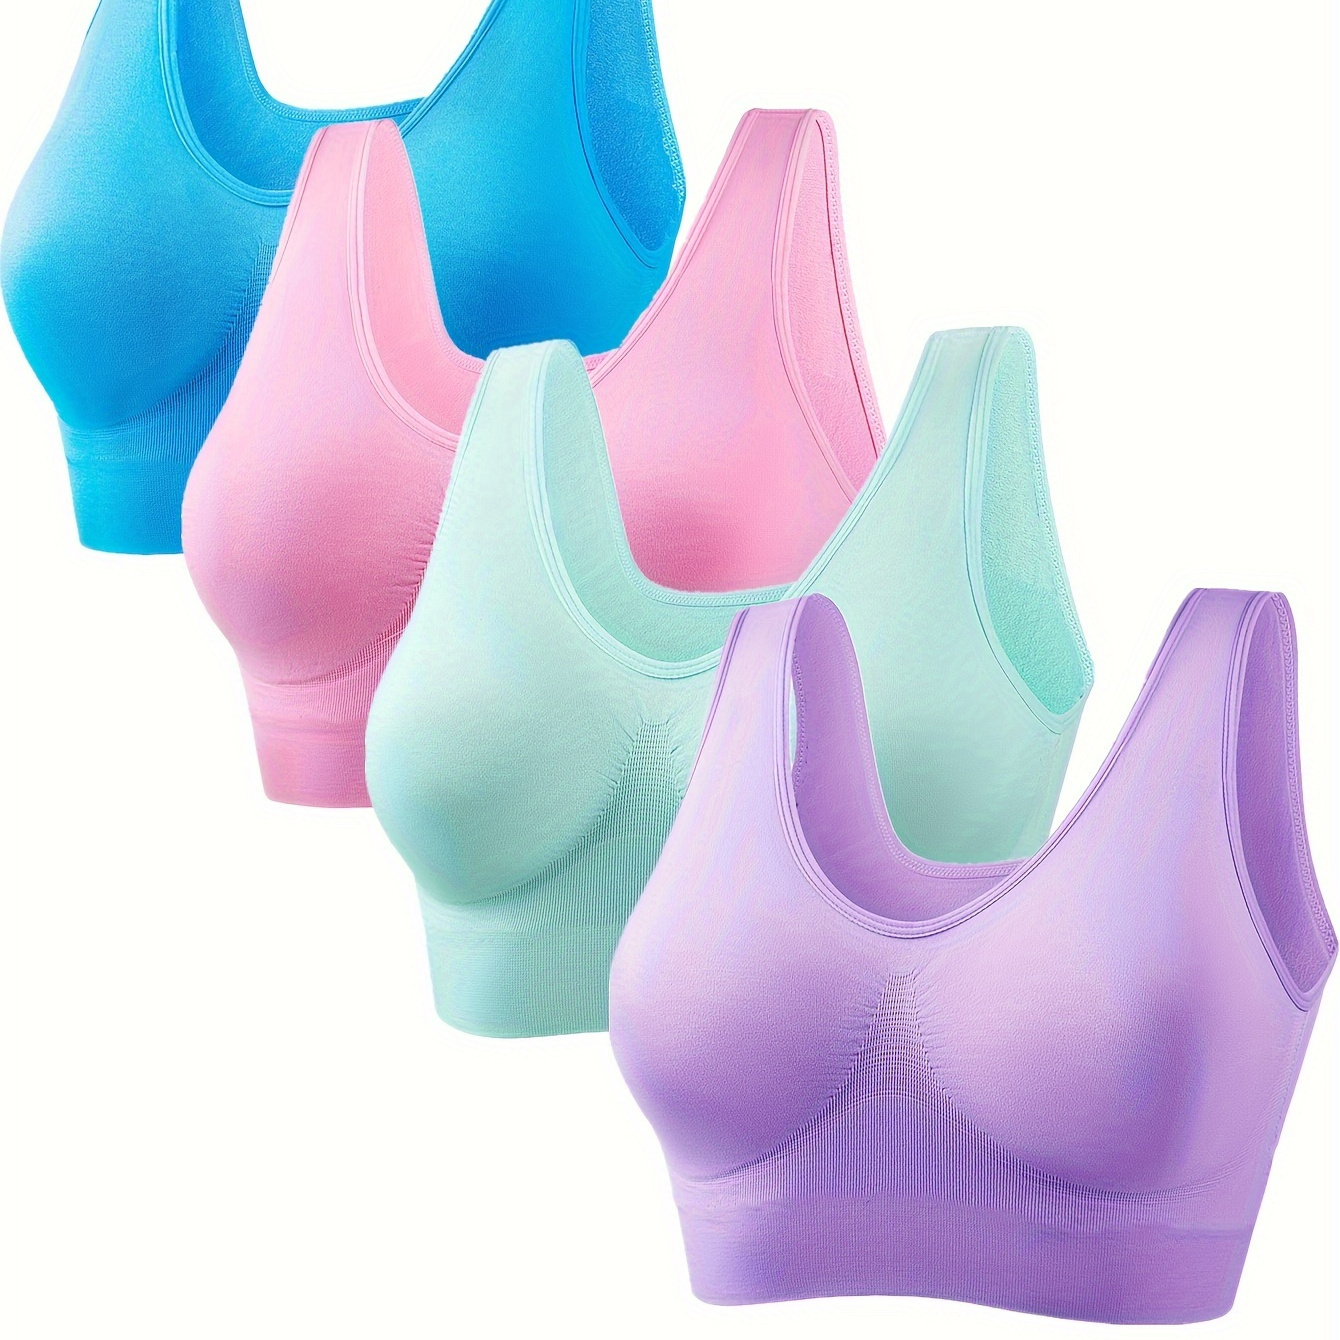 

4pcs Solid Color High Support Sporty Bra, Scoop Neck Backless Wireless Comfy Workout Everyday Bra, Women's Lingerie & Underwear